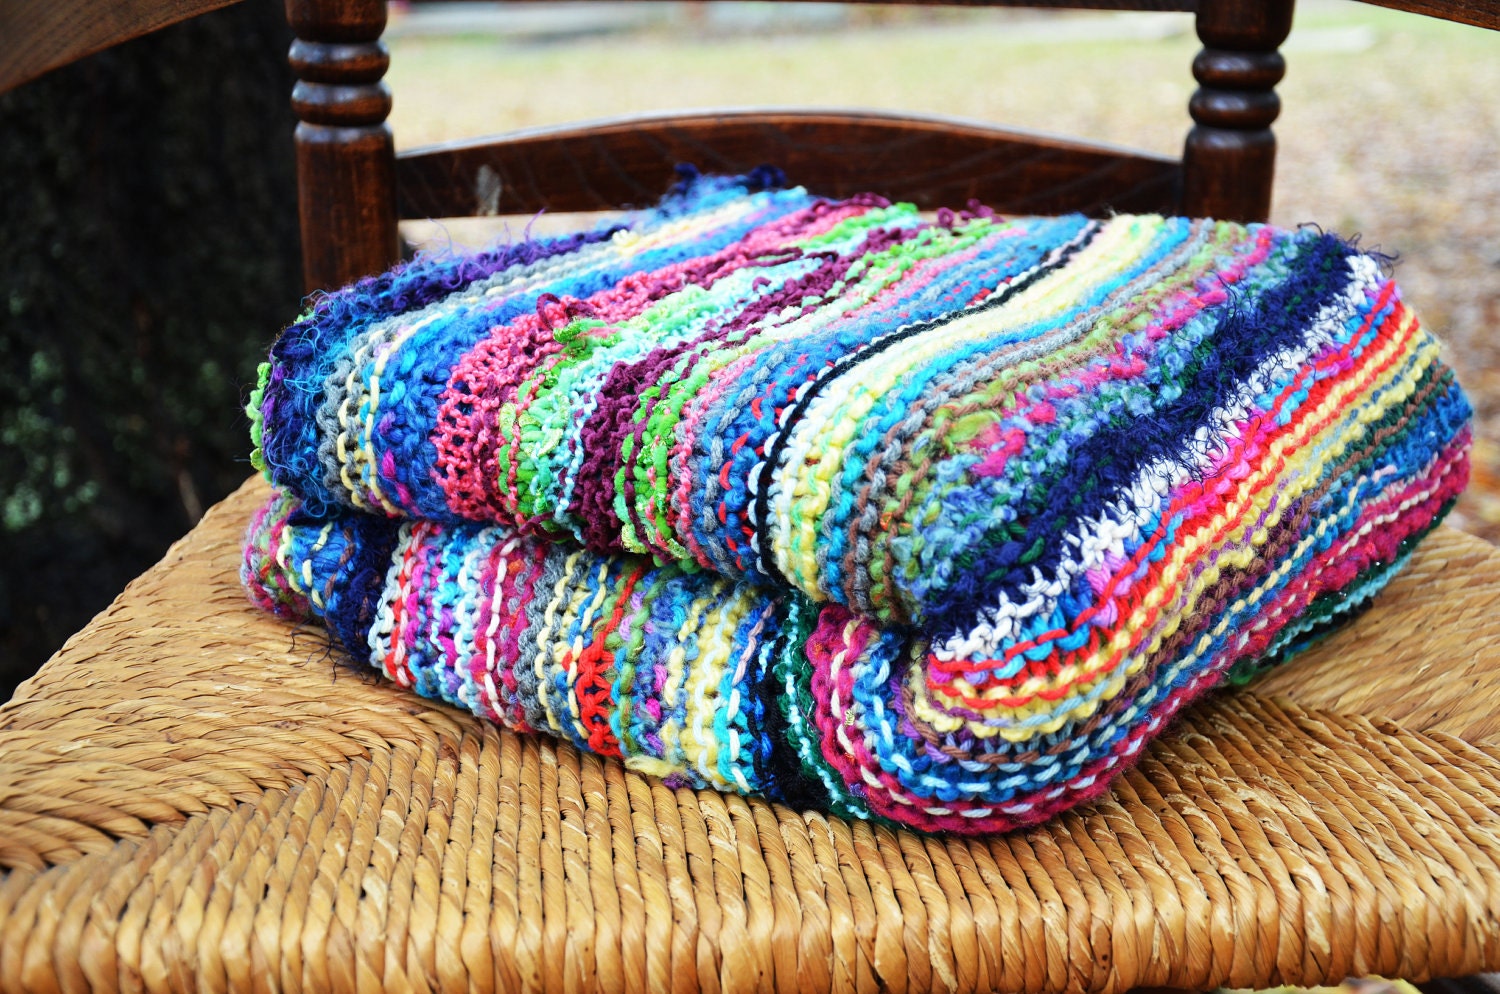 Multicolored Loose Knit Lap Blanket by LEsperanceDesign on Etsy